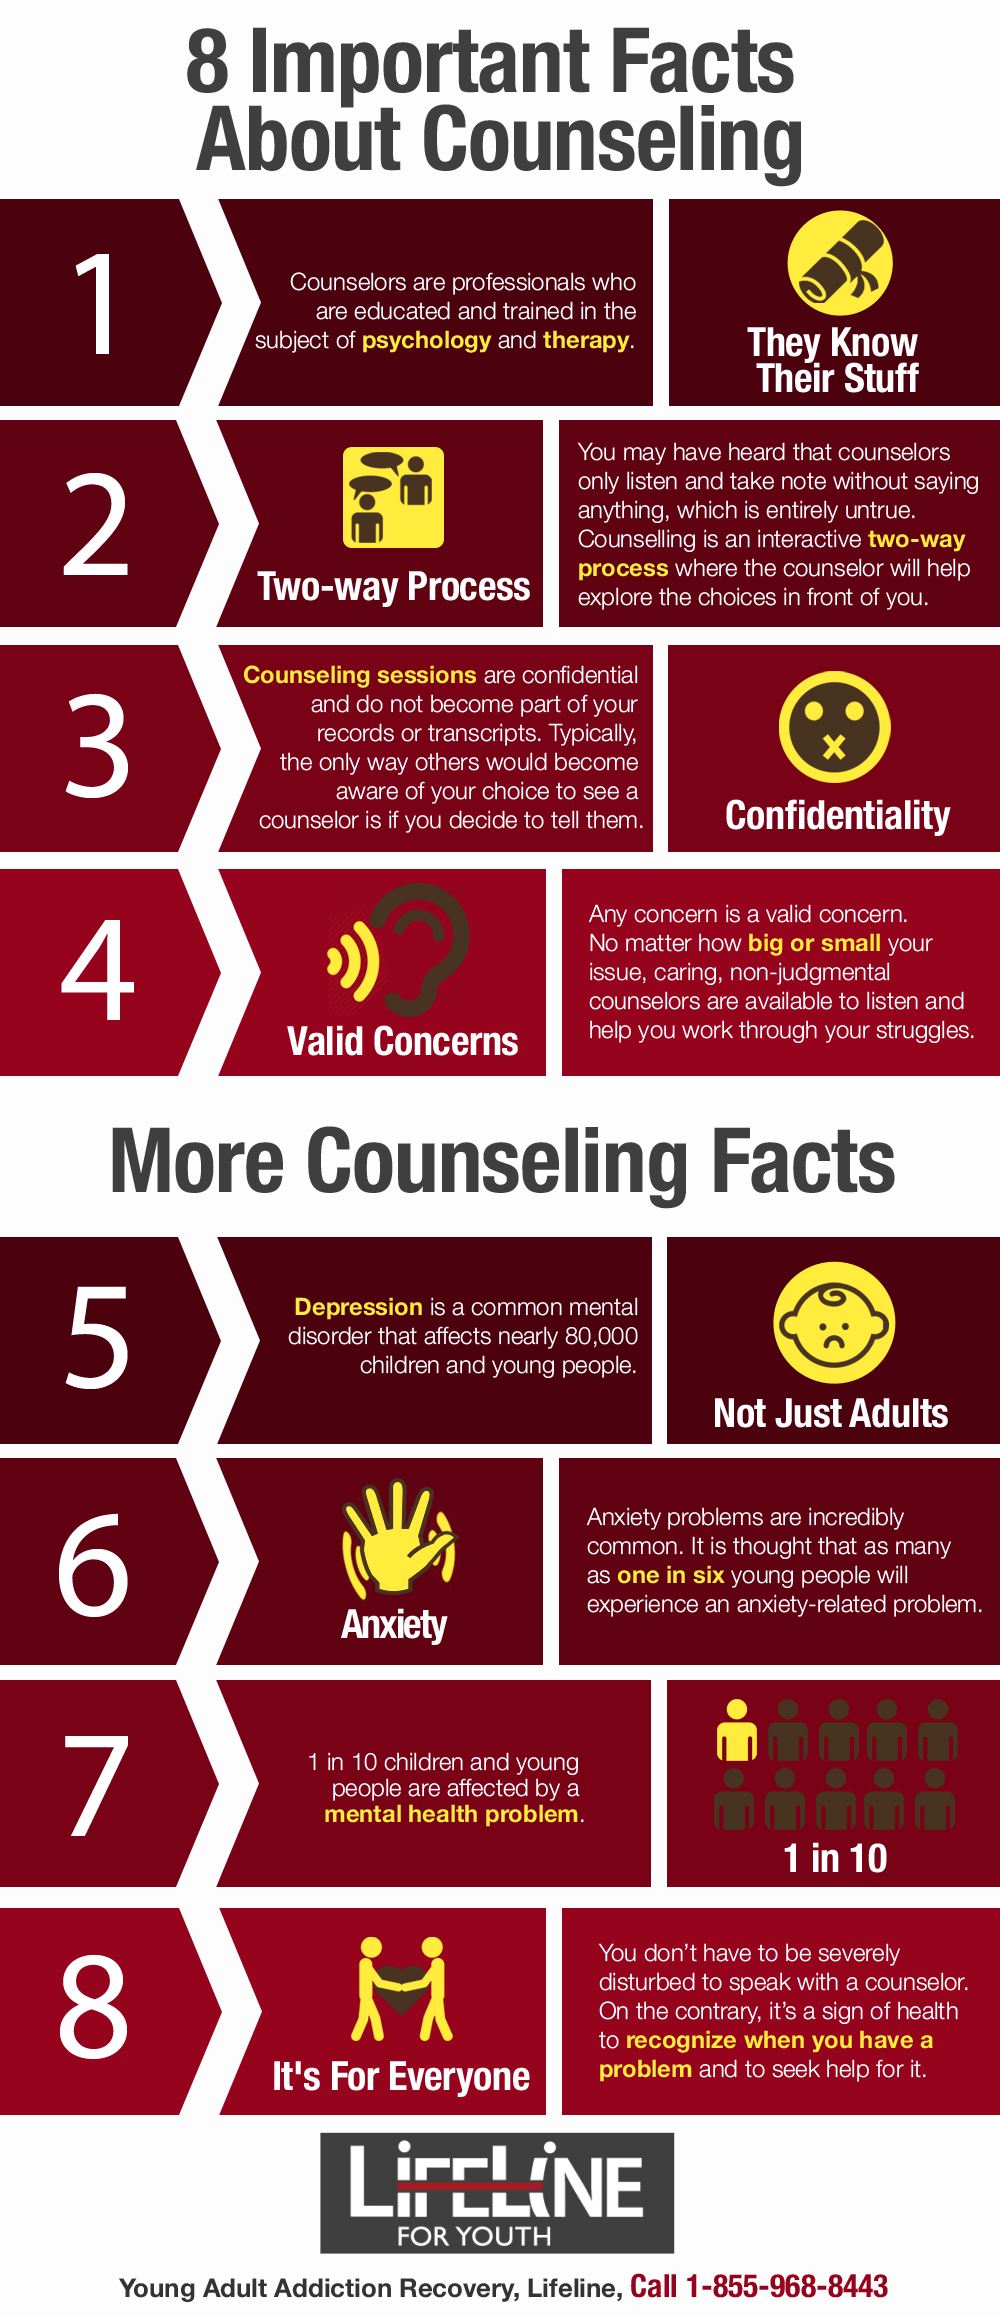 further research about counseling